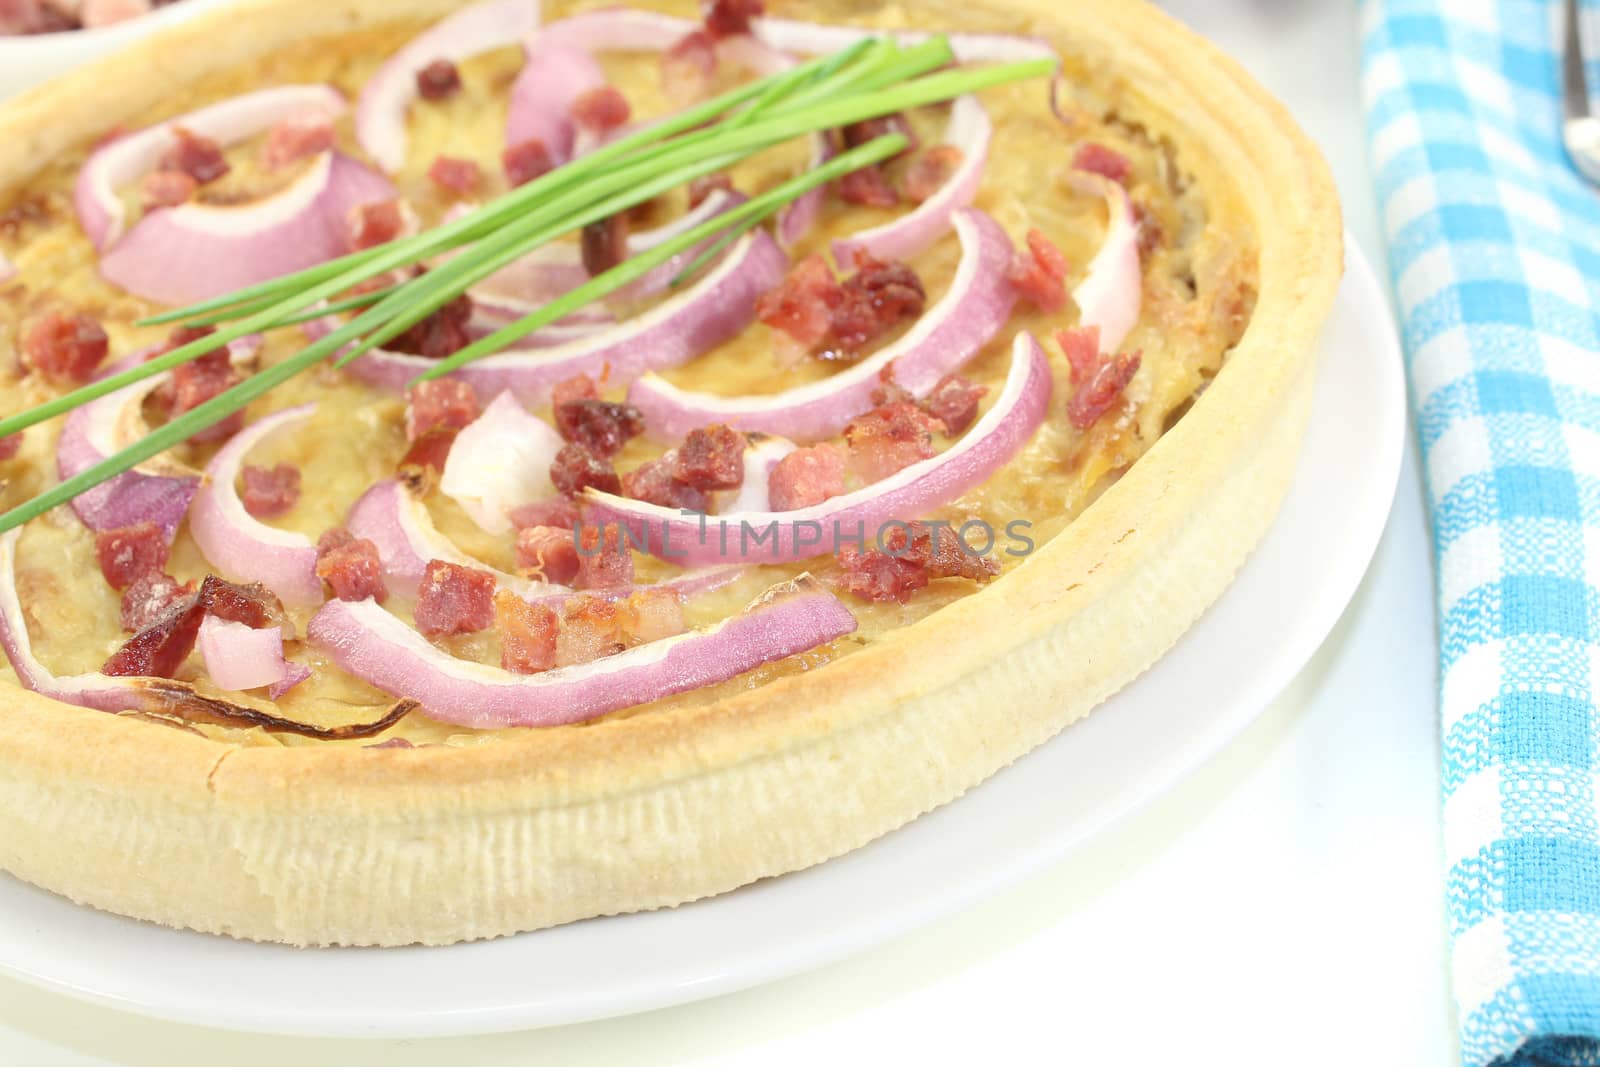 fresh Onion tart with leeks and bacon on a light background